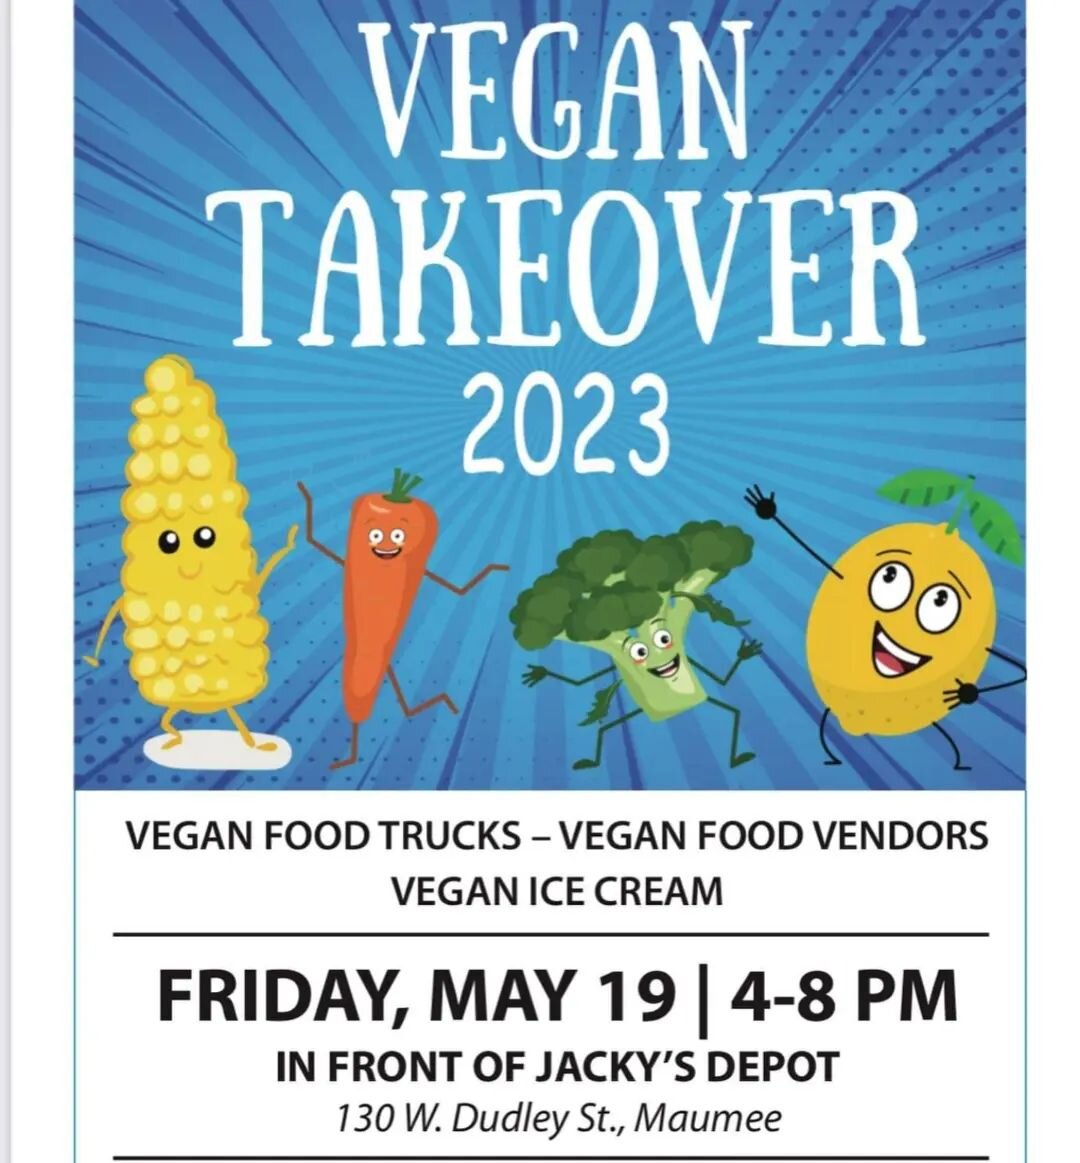 Vegan Takeover is TODAY in front of Jacky&rsquo;s! 4-8 pm! Rain or shine! 

Grab scoop of vegan ice cream from Jacky&rsquo;s!

Get dinner from @theleafandseed_ or @franklypbk or pick up some baked goods from @vegan_taste419 

@pantlessbrands  has an 